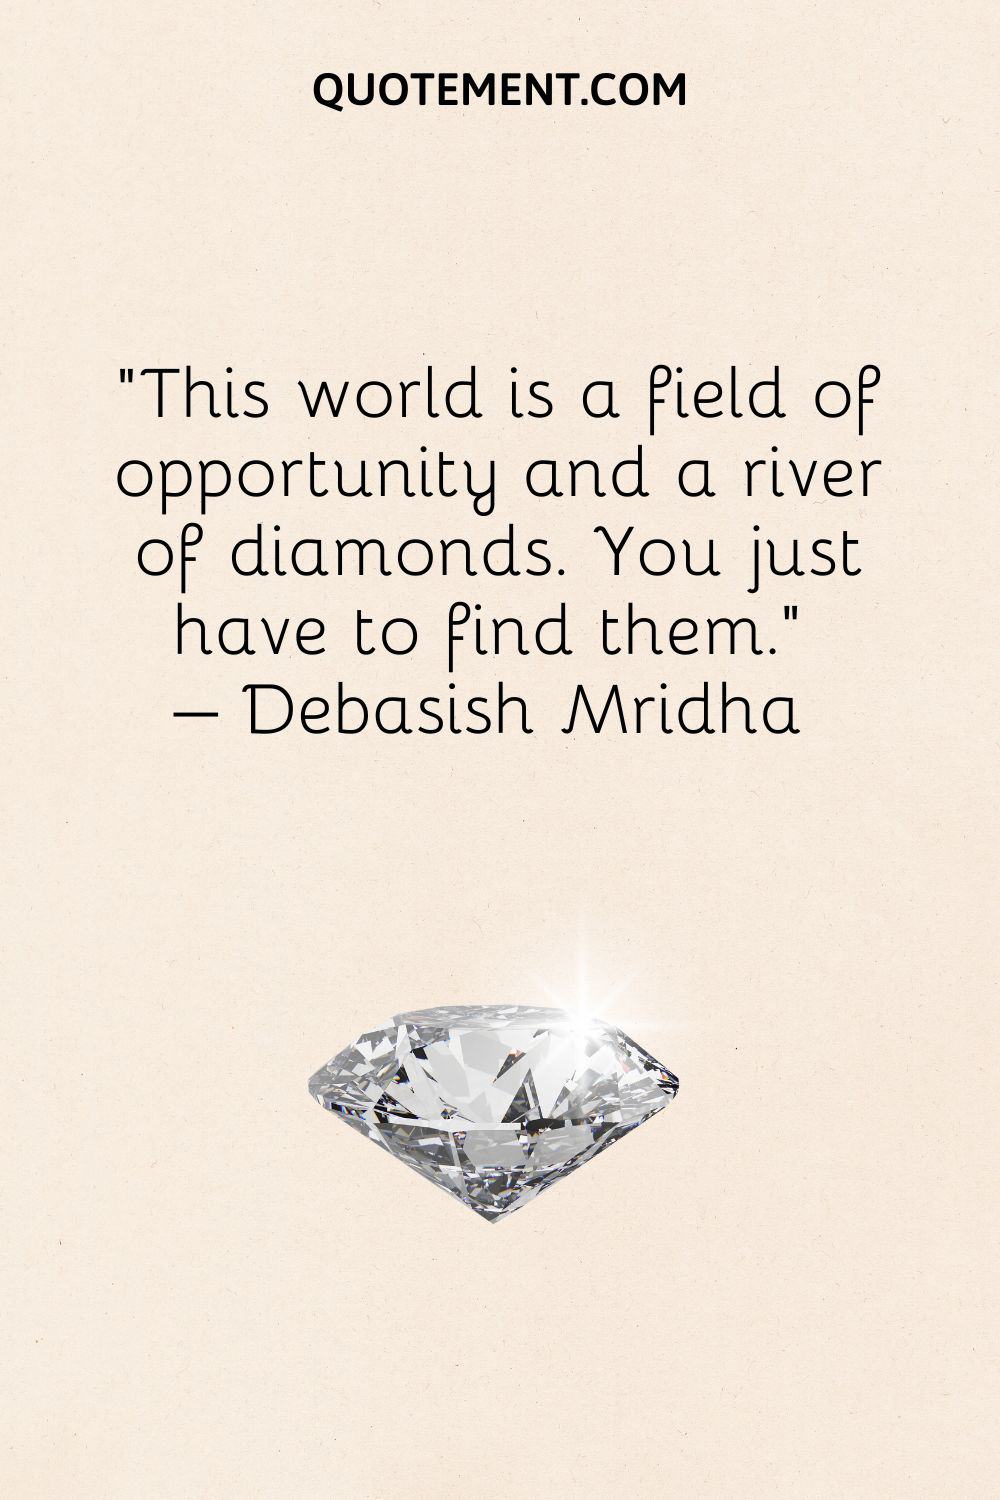 This world is a field of opportunity and a river of diamonds. You just have to find them